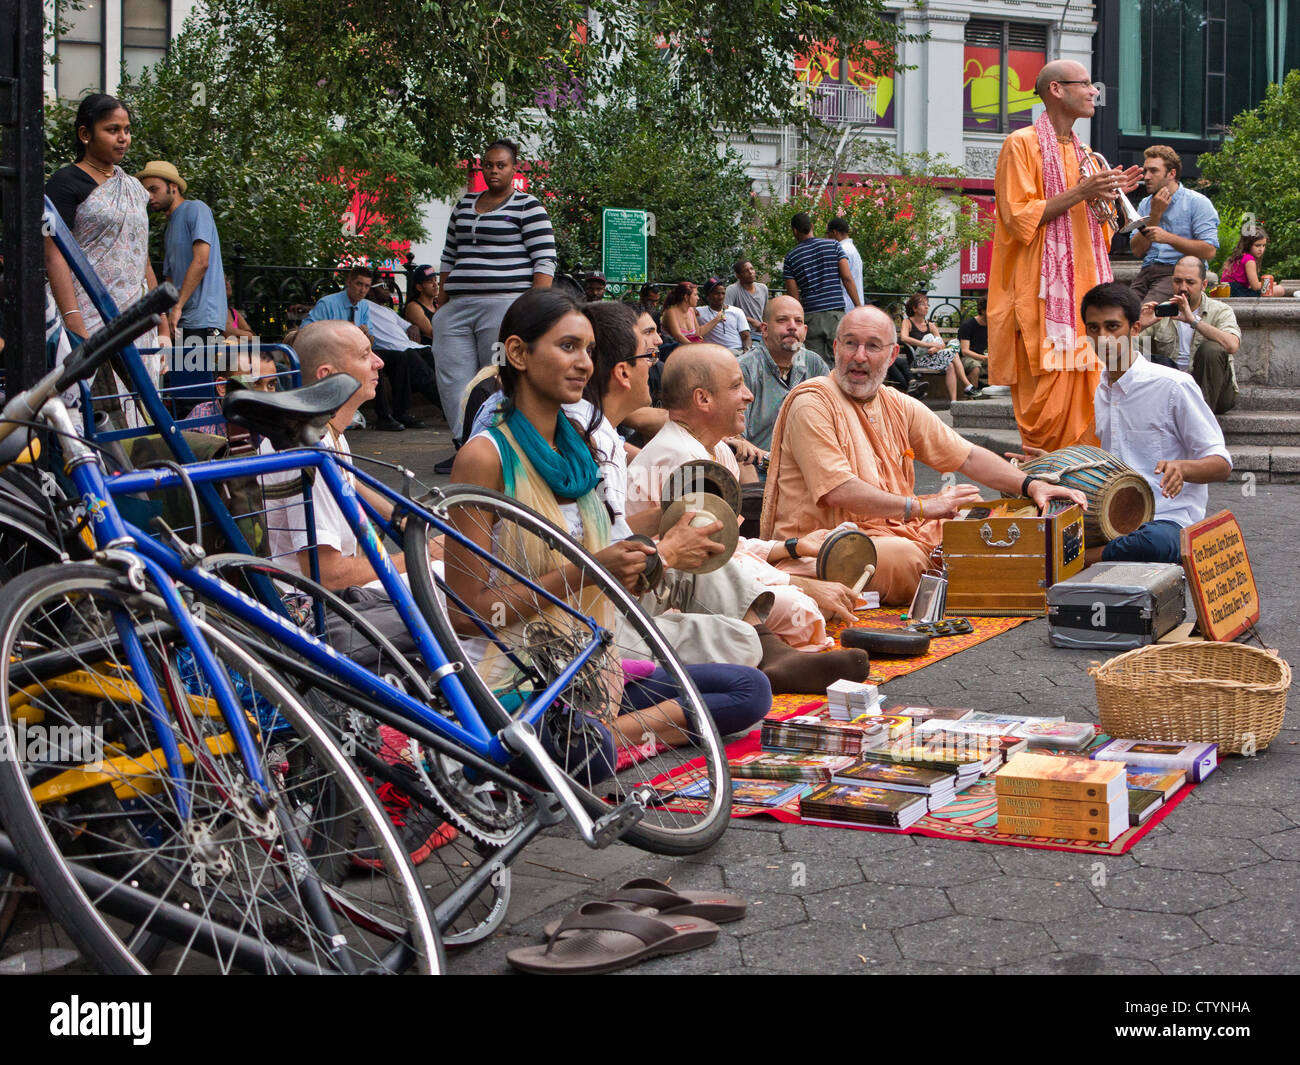 Members of the Hare Krishna movement congregate for song and recitation at Union Square, Manhattan. New York, New York, USA. Stock Photo